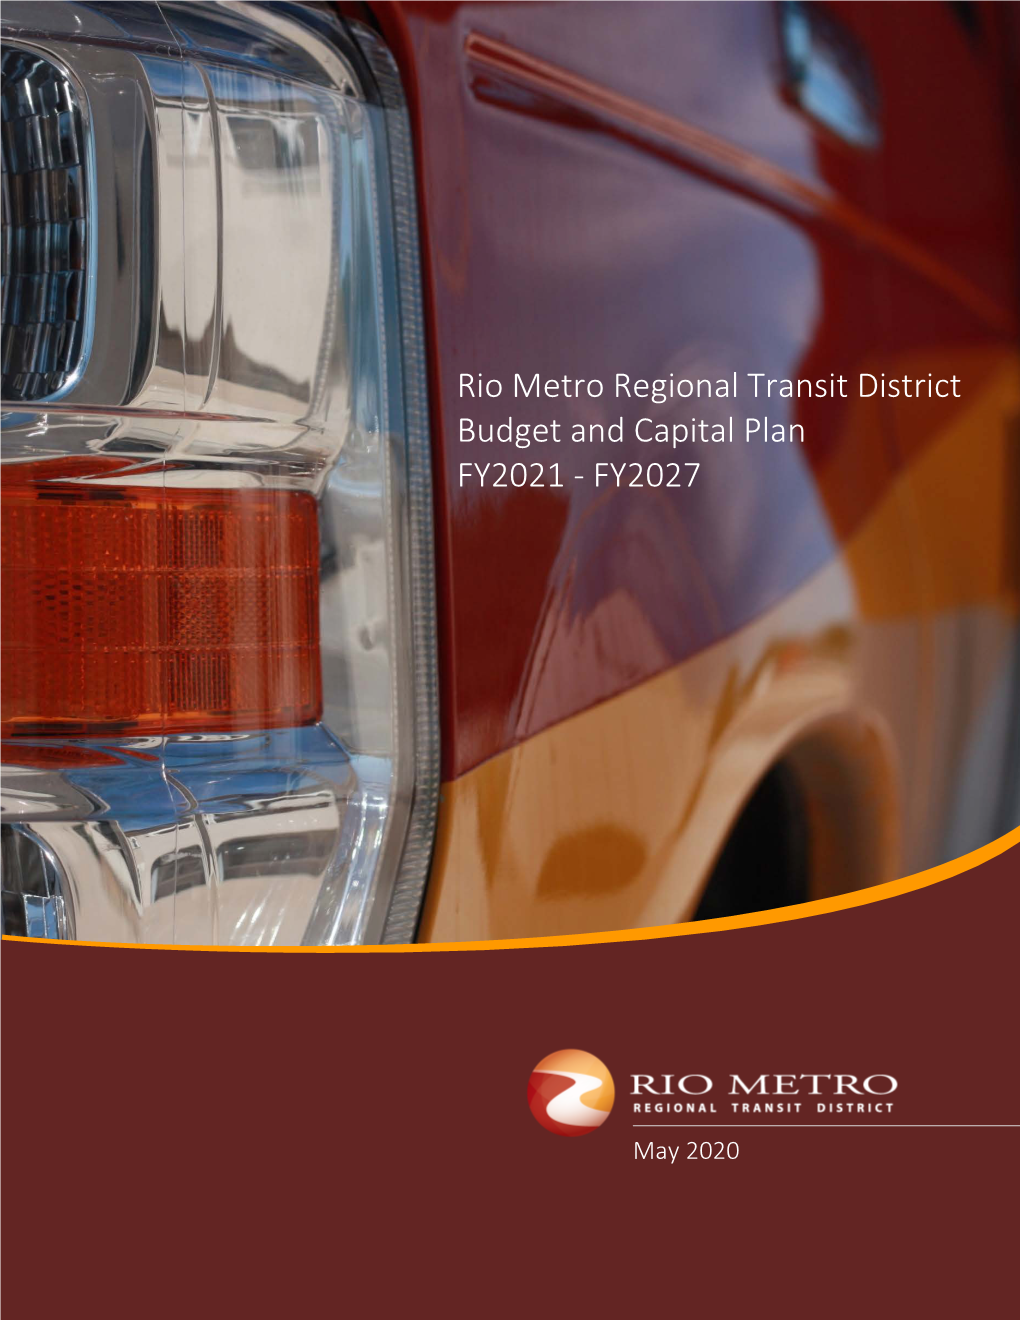 Rio Metro Regional Transit District Budget and Capital Plan FY2021 - FY2027